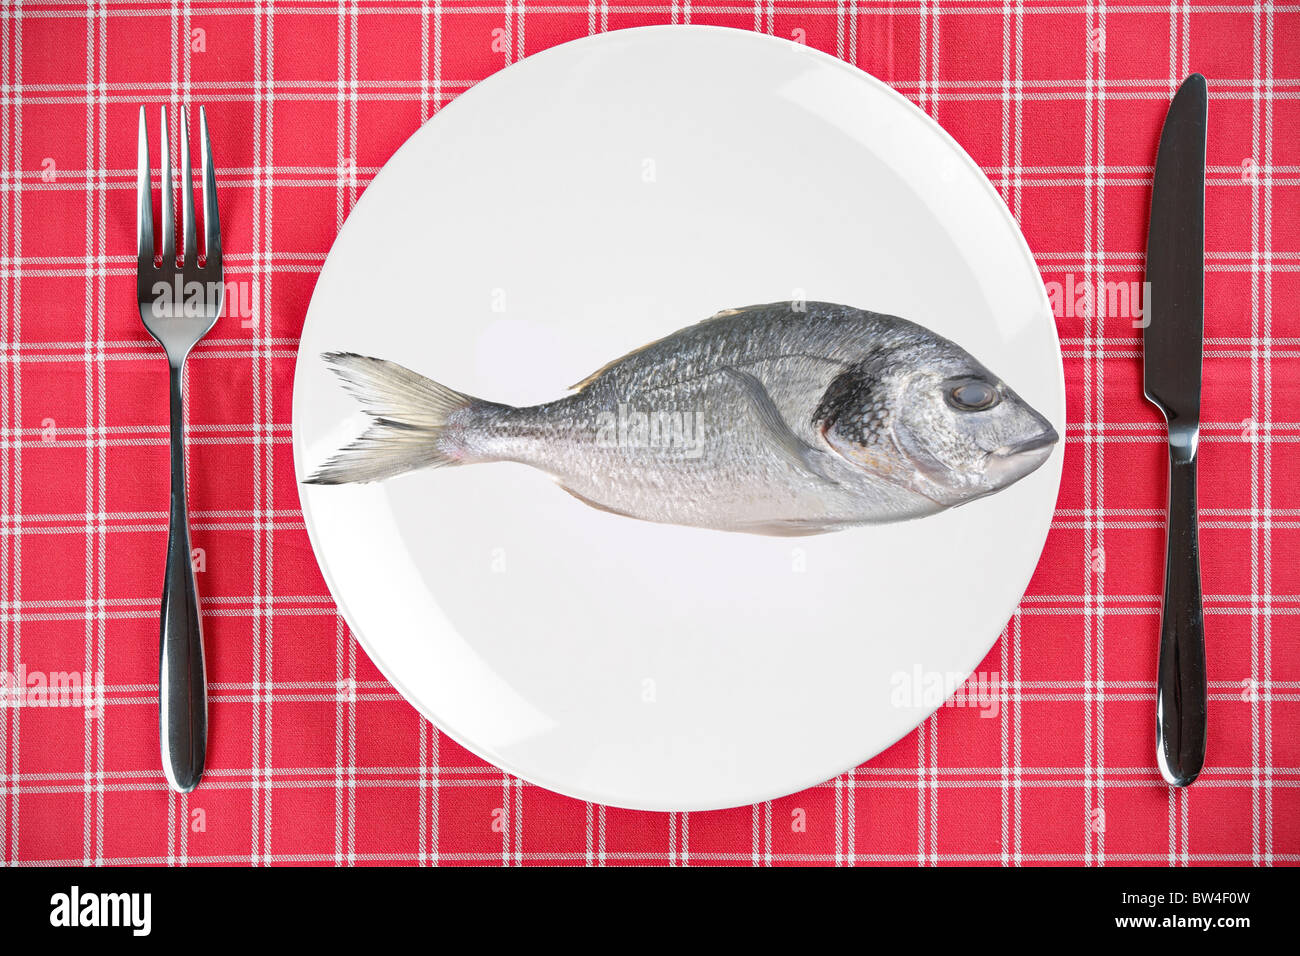 Uncooked fish (sparus auratus) on a plate Stock Photo